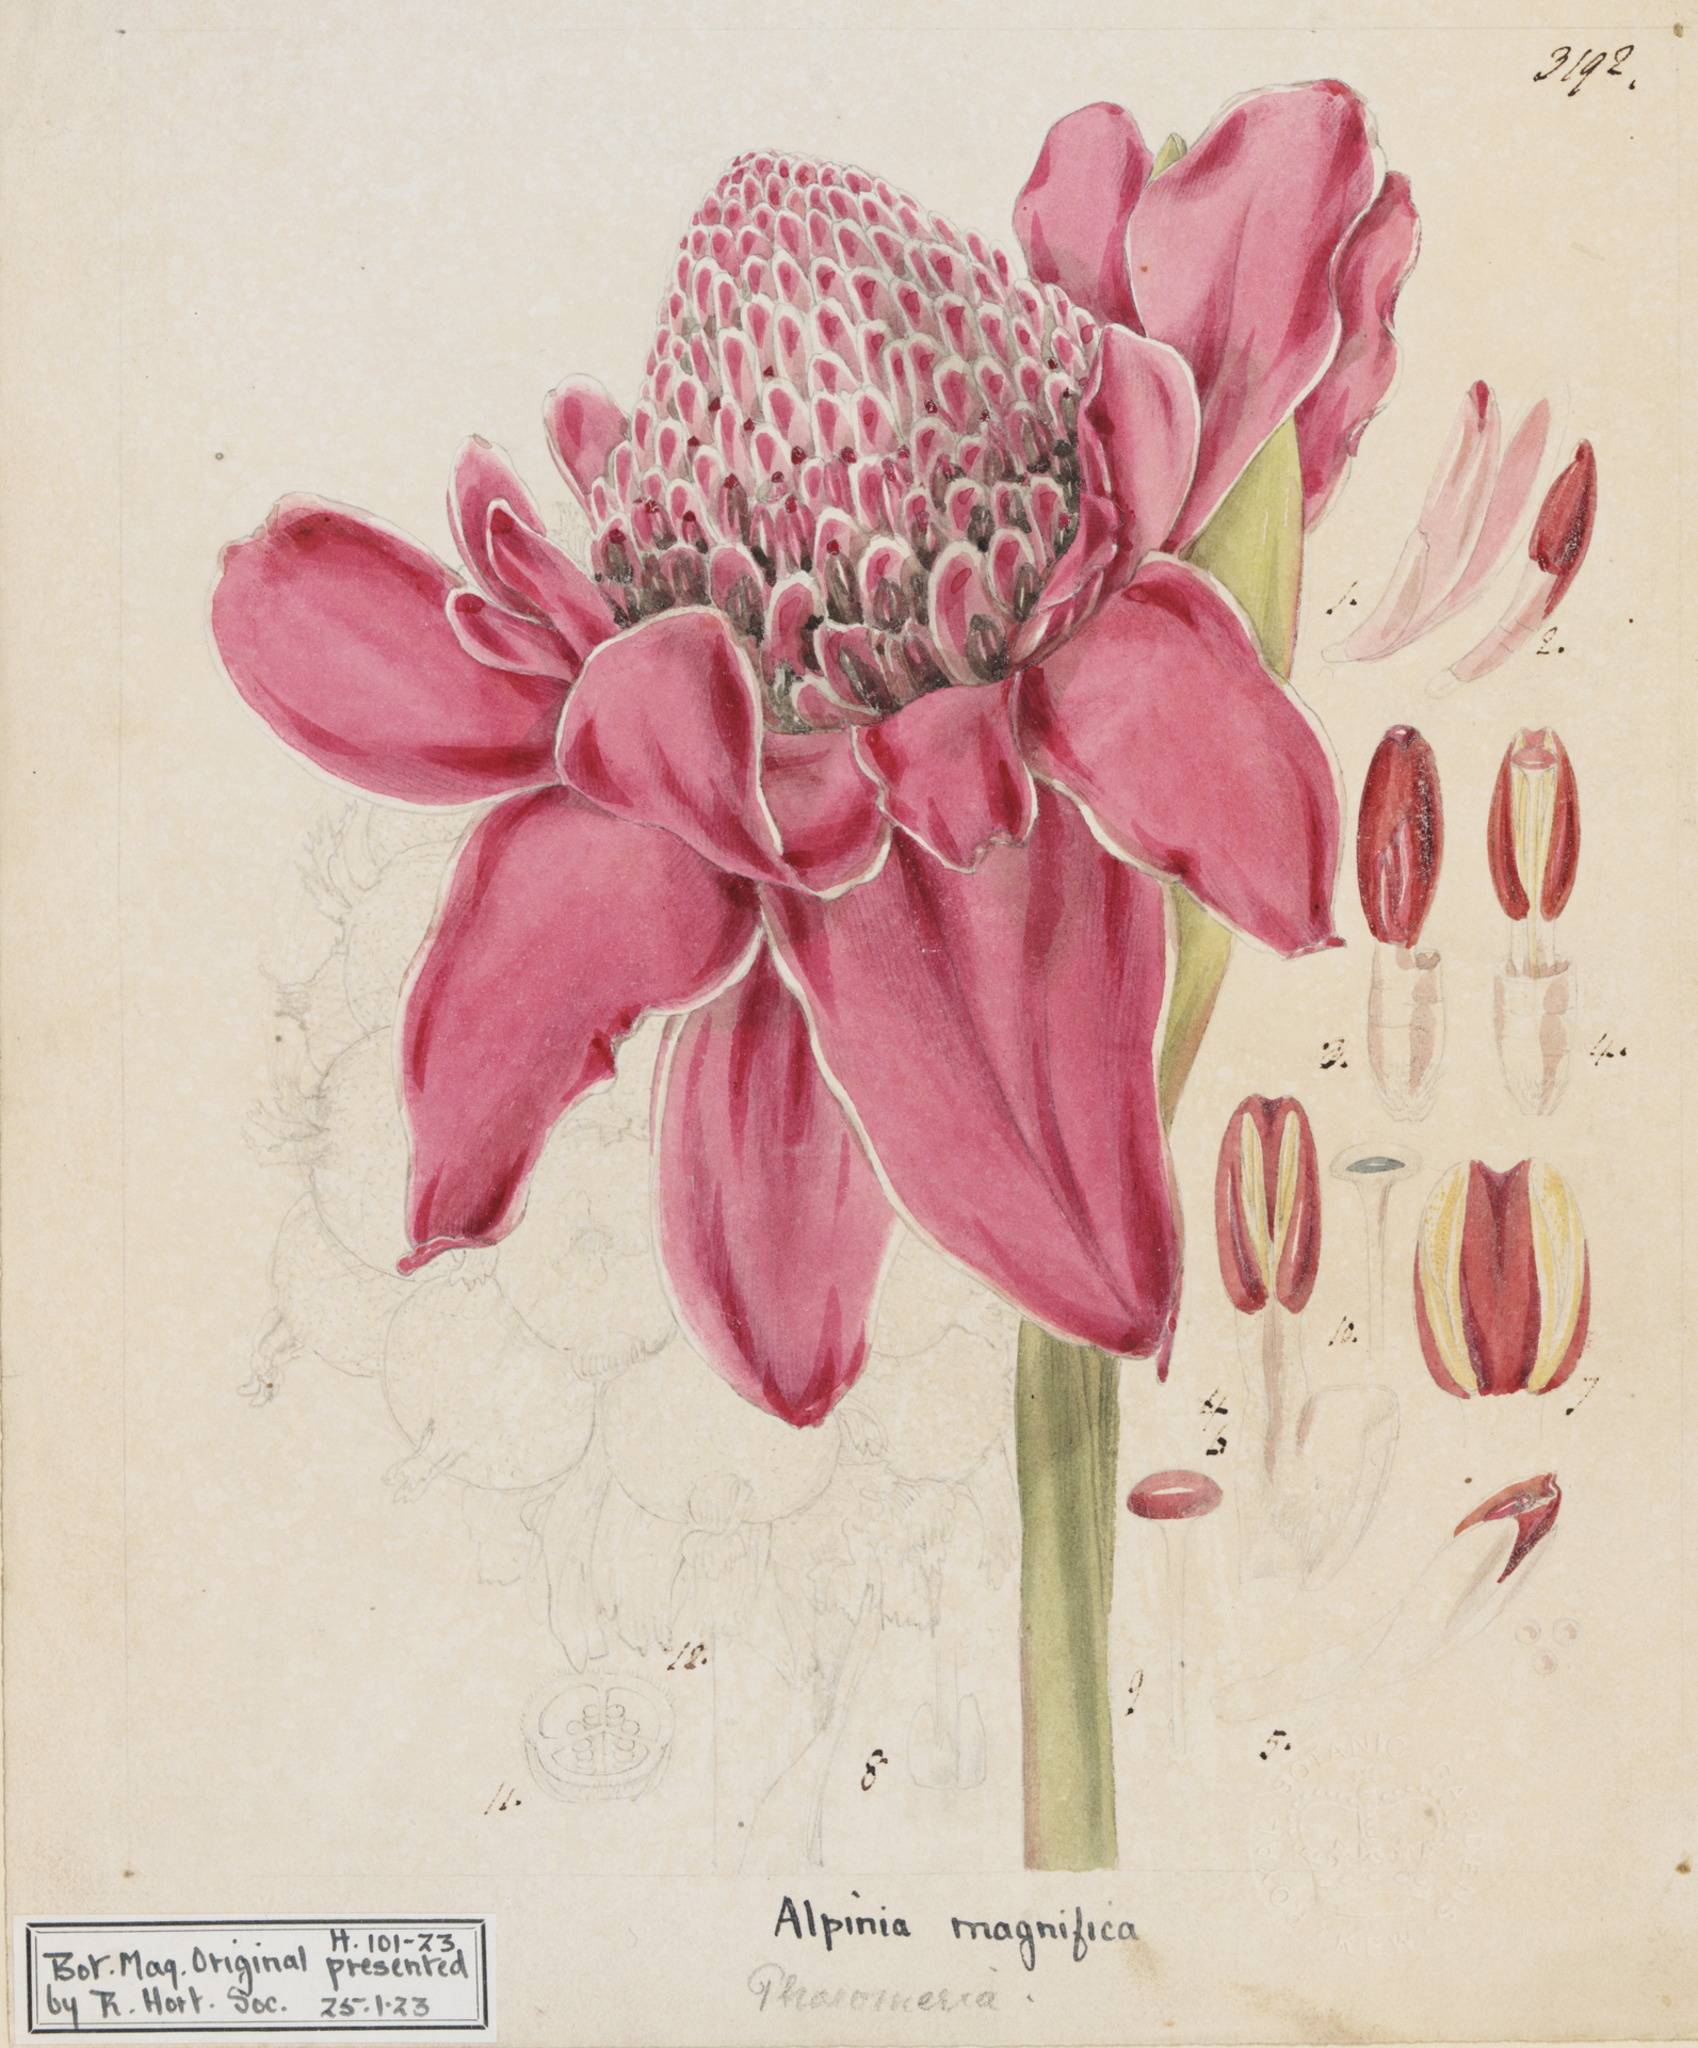 Illustration of Alpinia magnifica by Kew’s Director William Hooker 